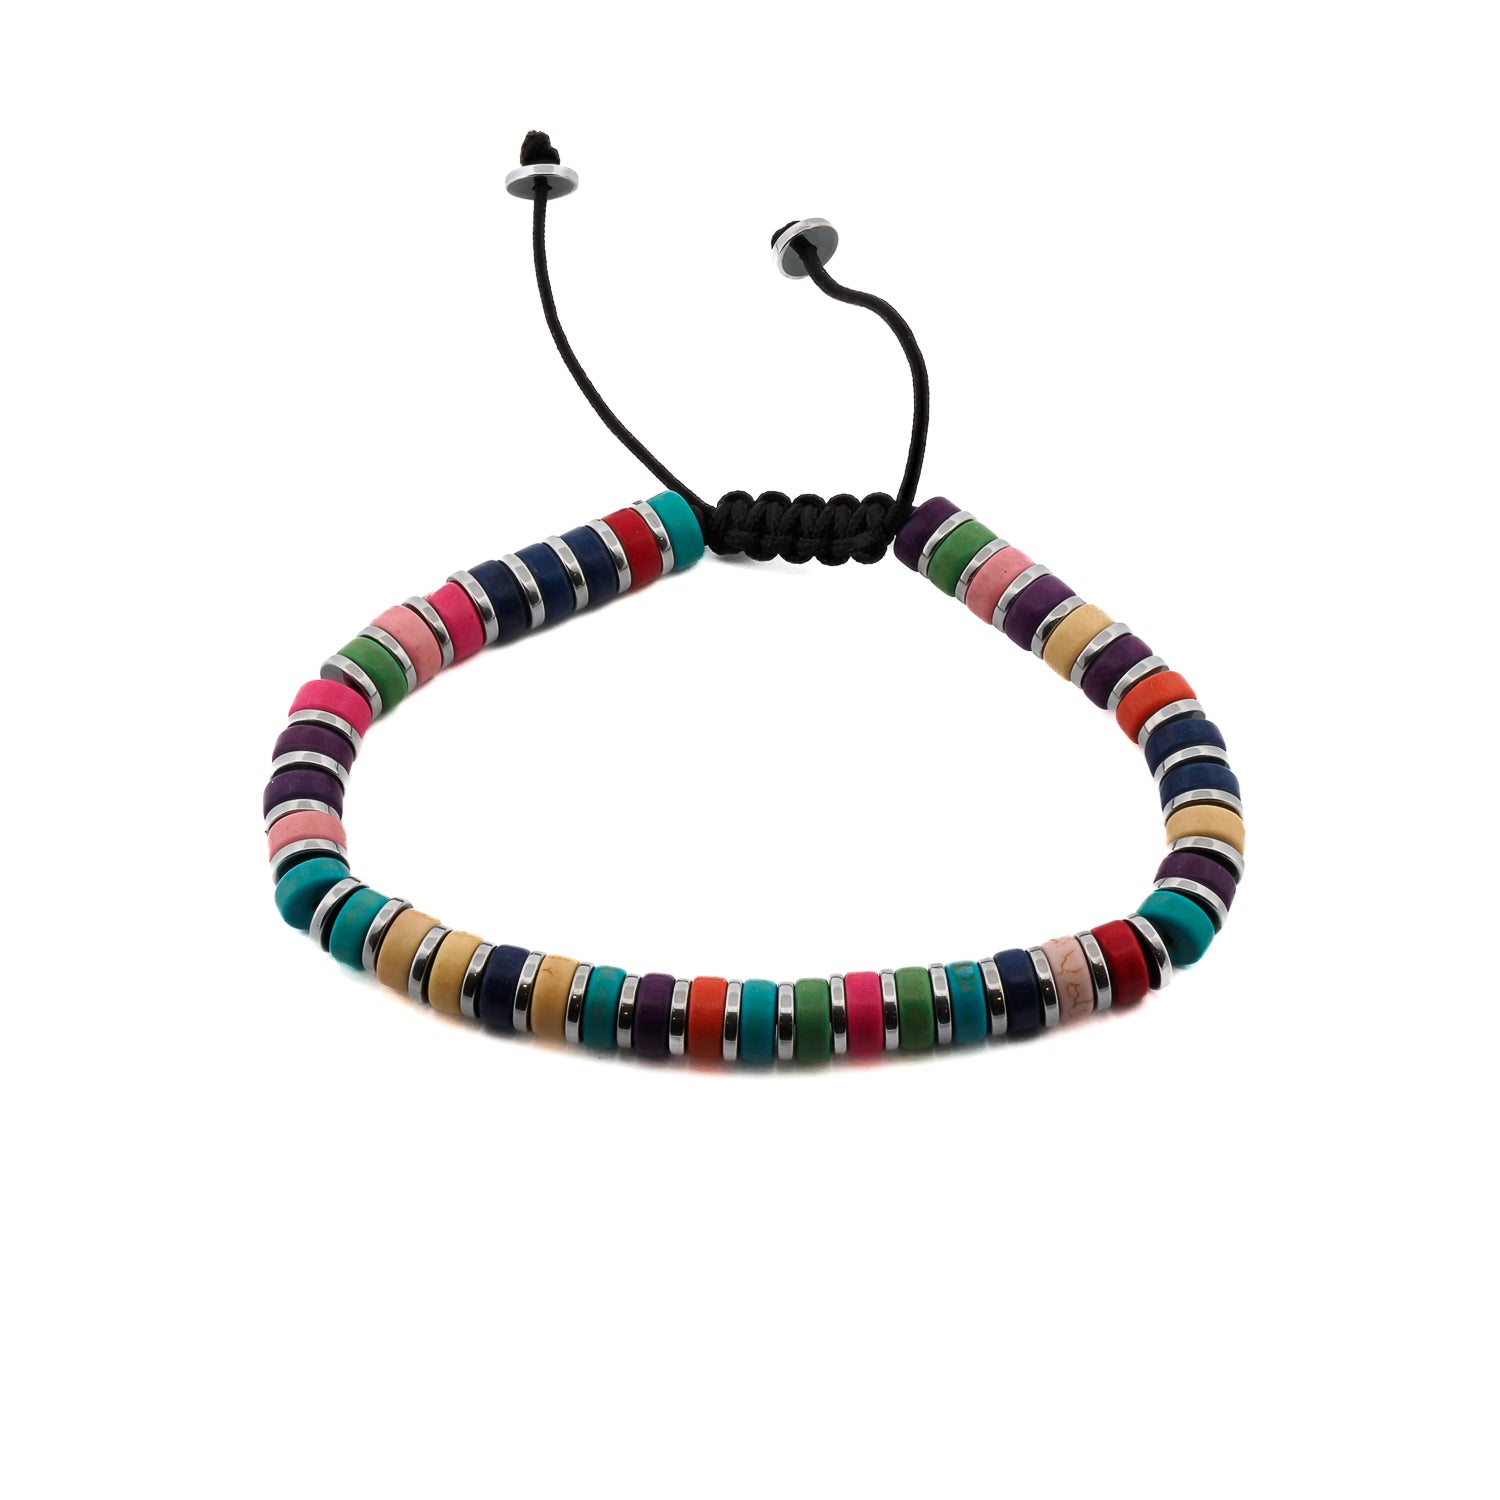 Vibrant Colorful Gemstone Beaded Summer Bracelet with an array of radiant gemstone beads and silver hematite spacers.